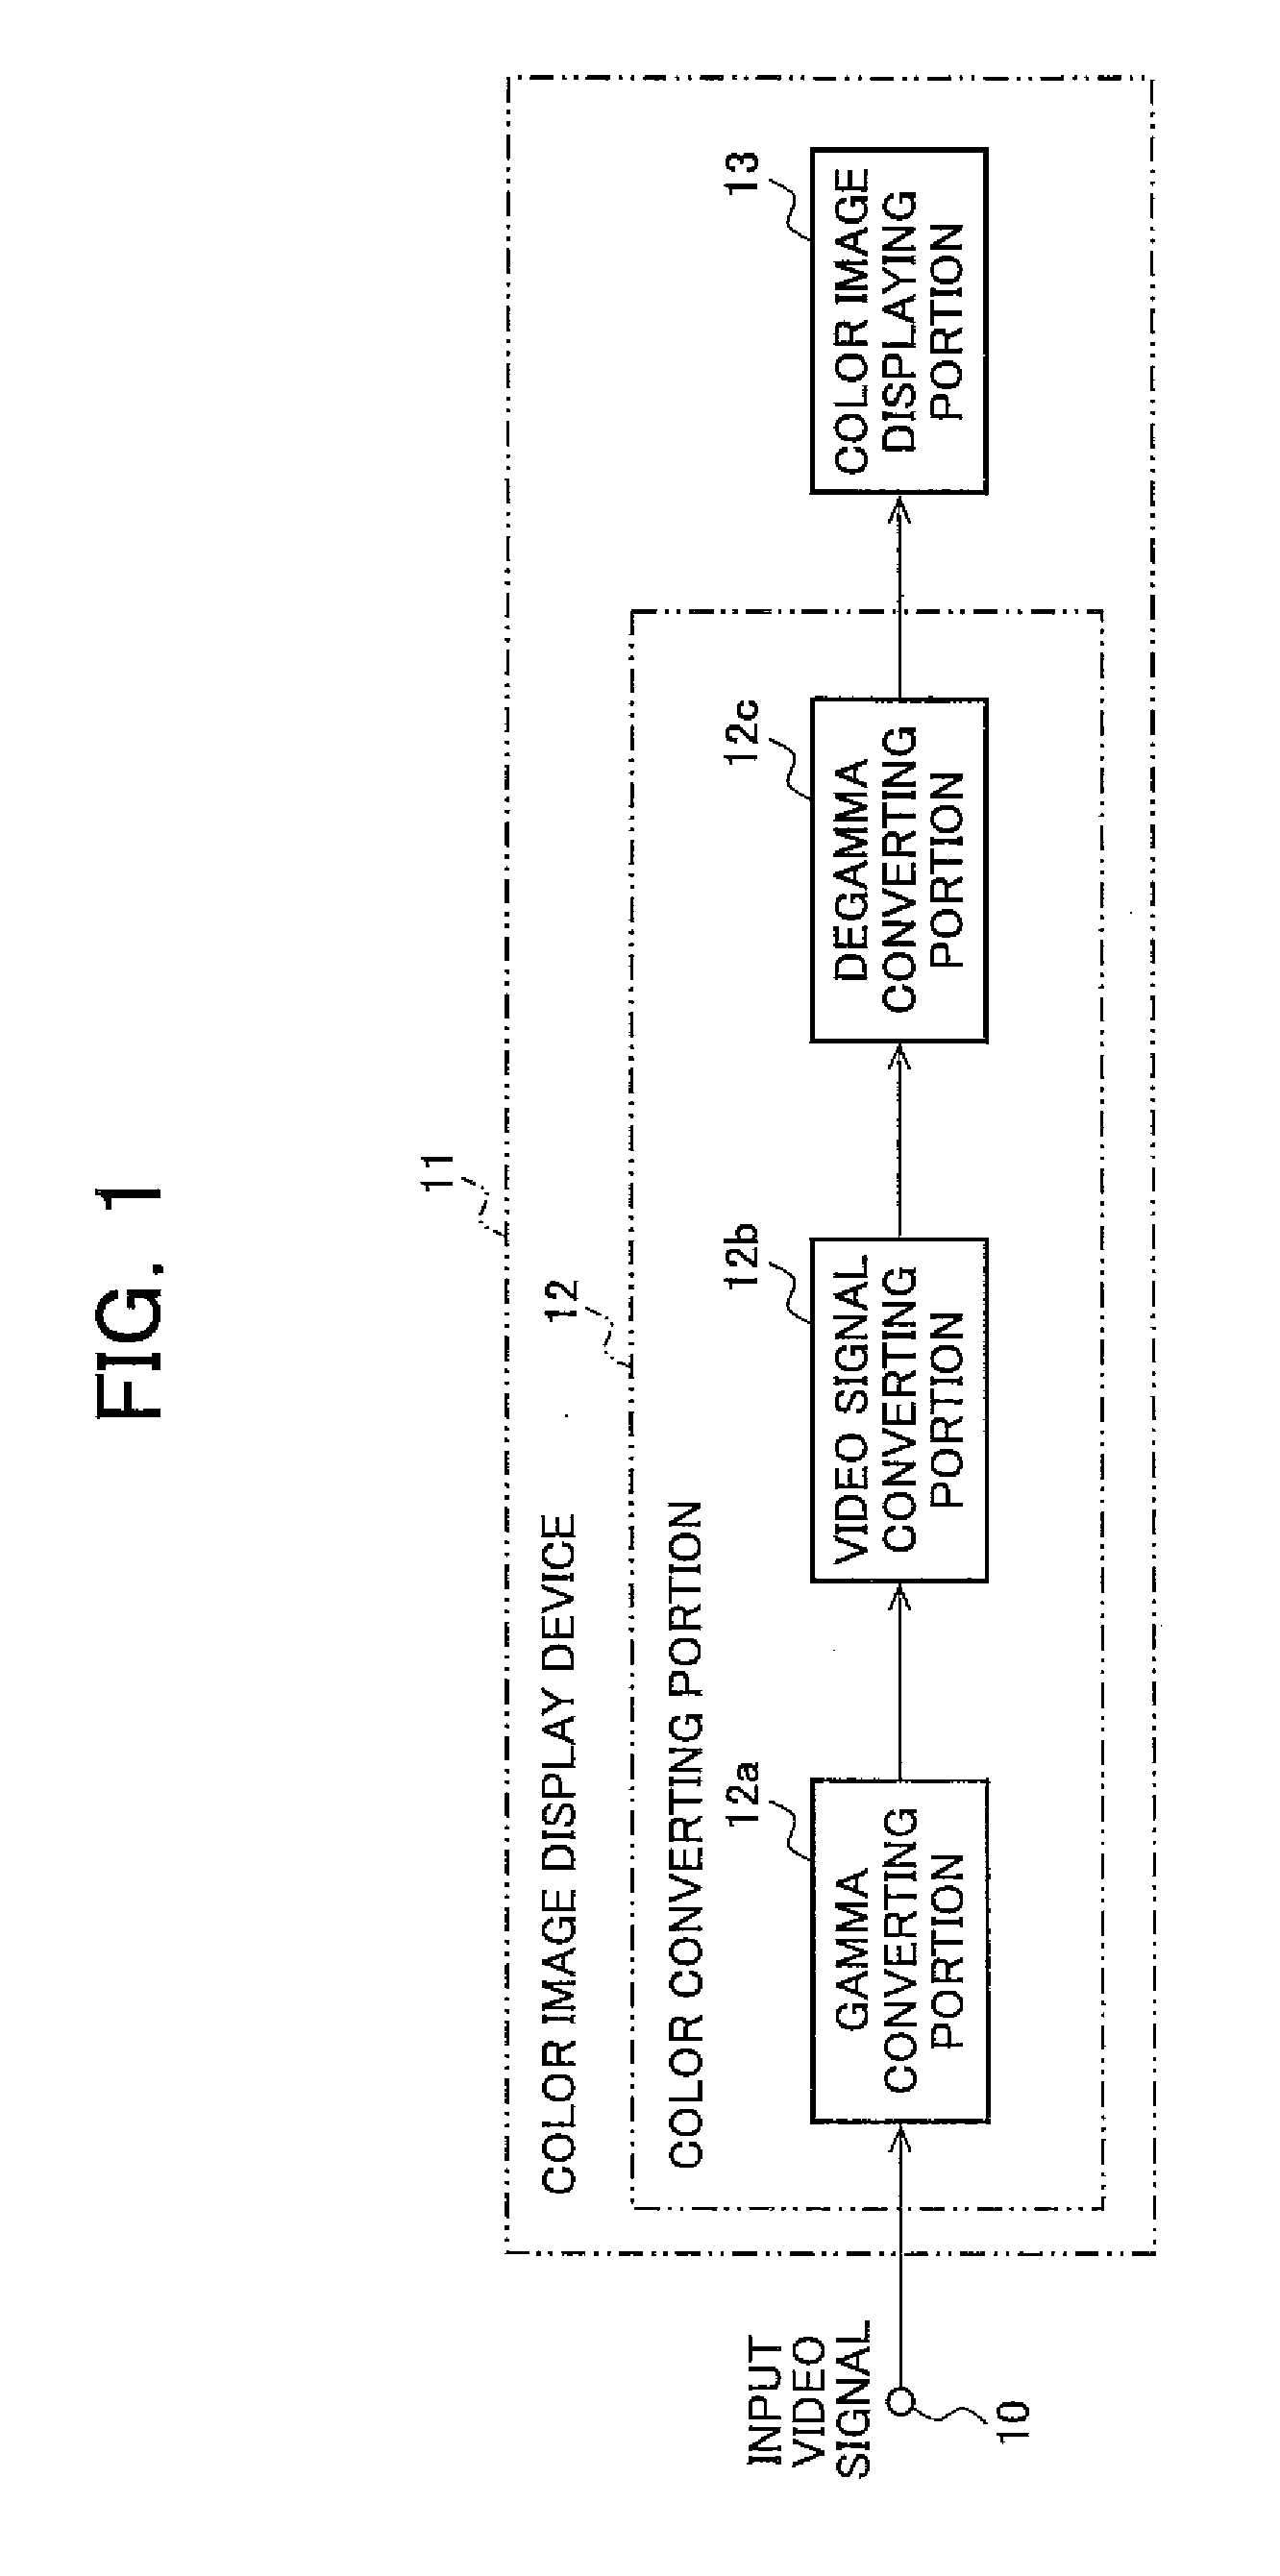 Color image display device and color conversion device